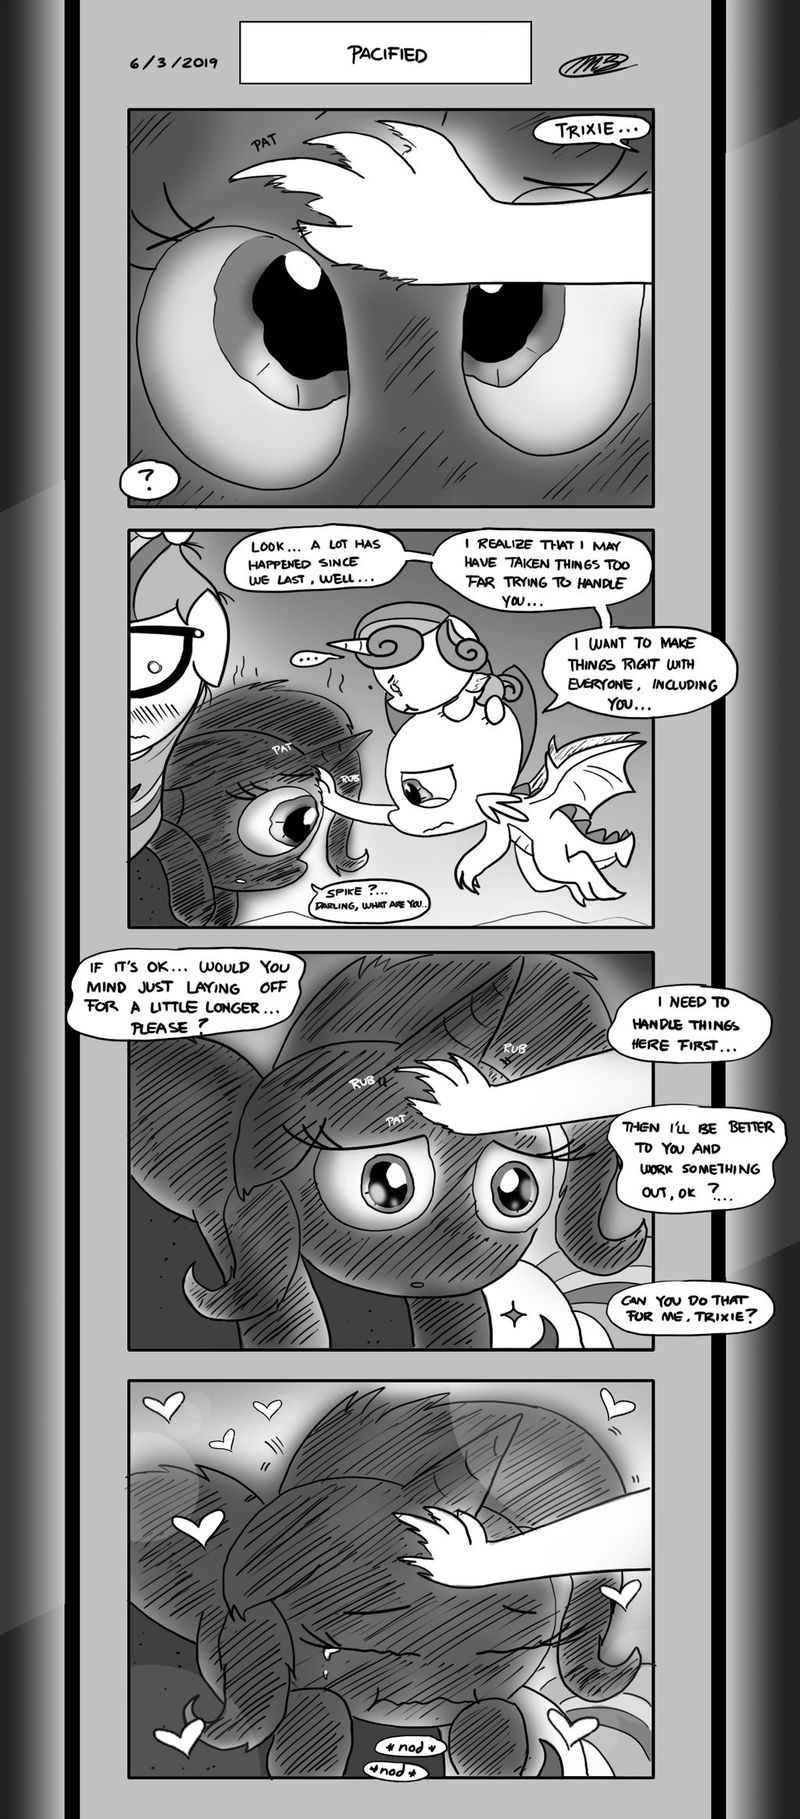 Page 11: Pacified